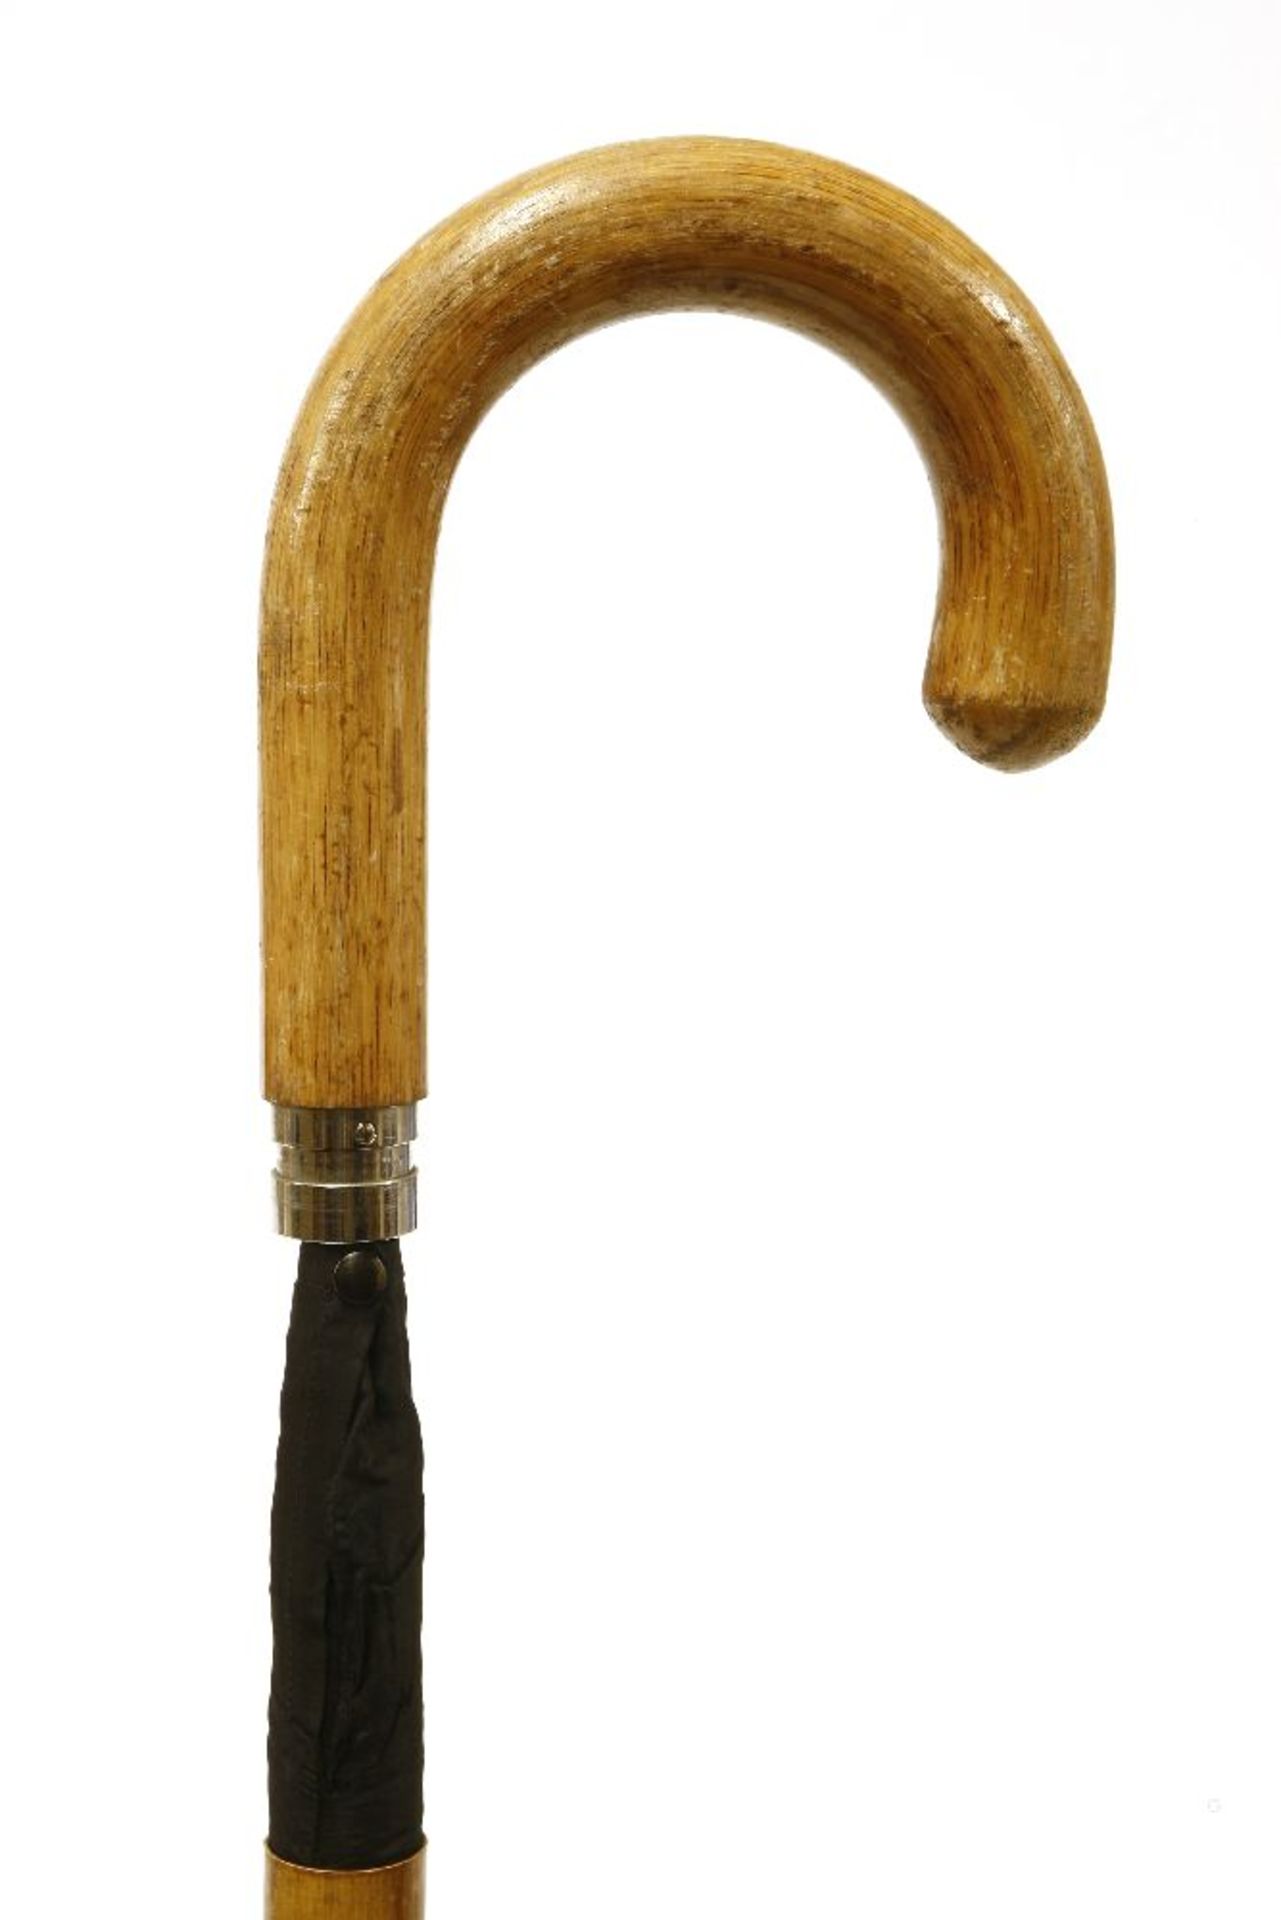 A stout traditional walking stick,c.1900, containing a rolled umbrella,89cm long